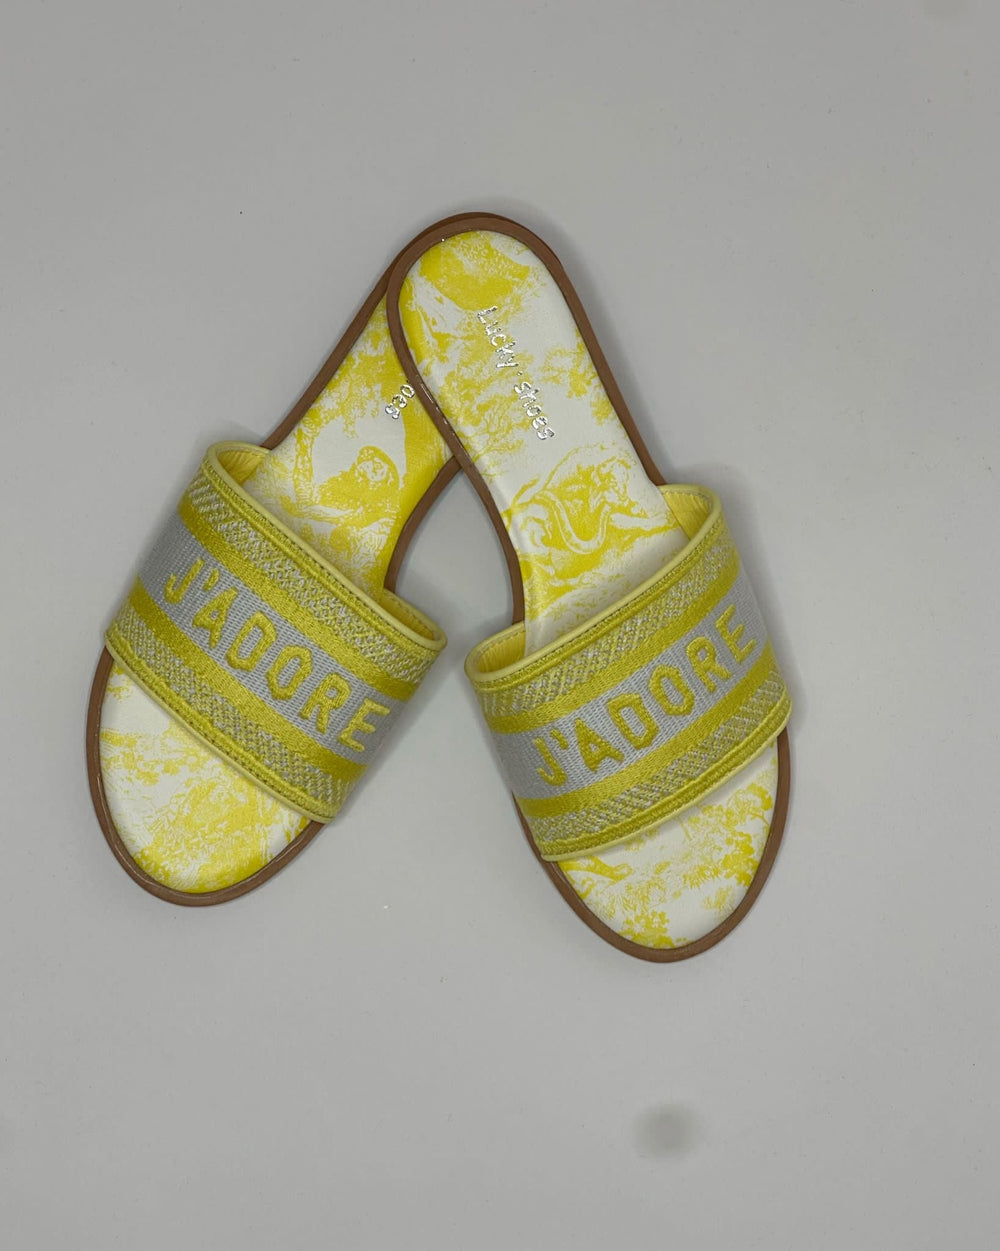 Slippers “J’adore”